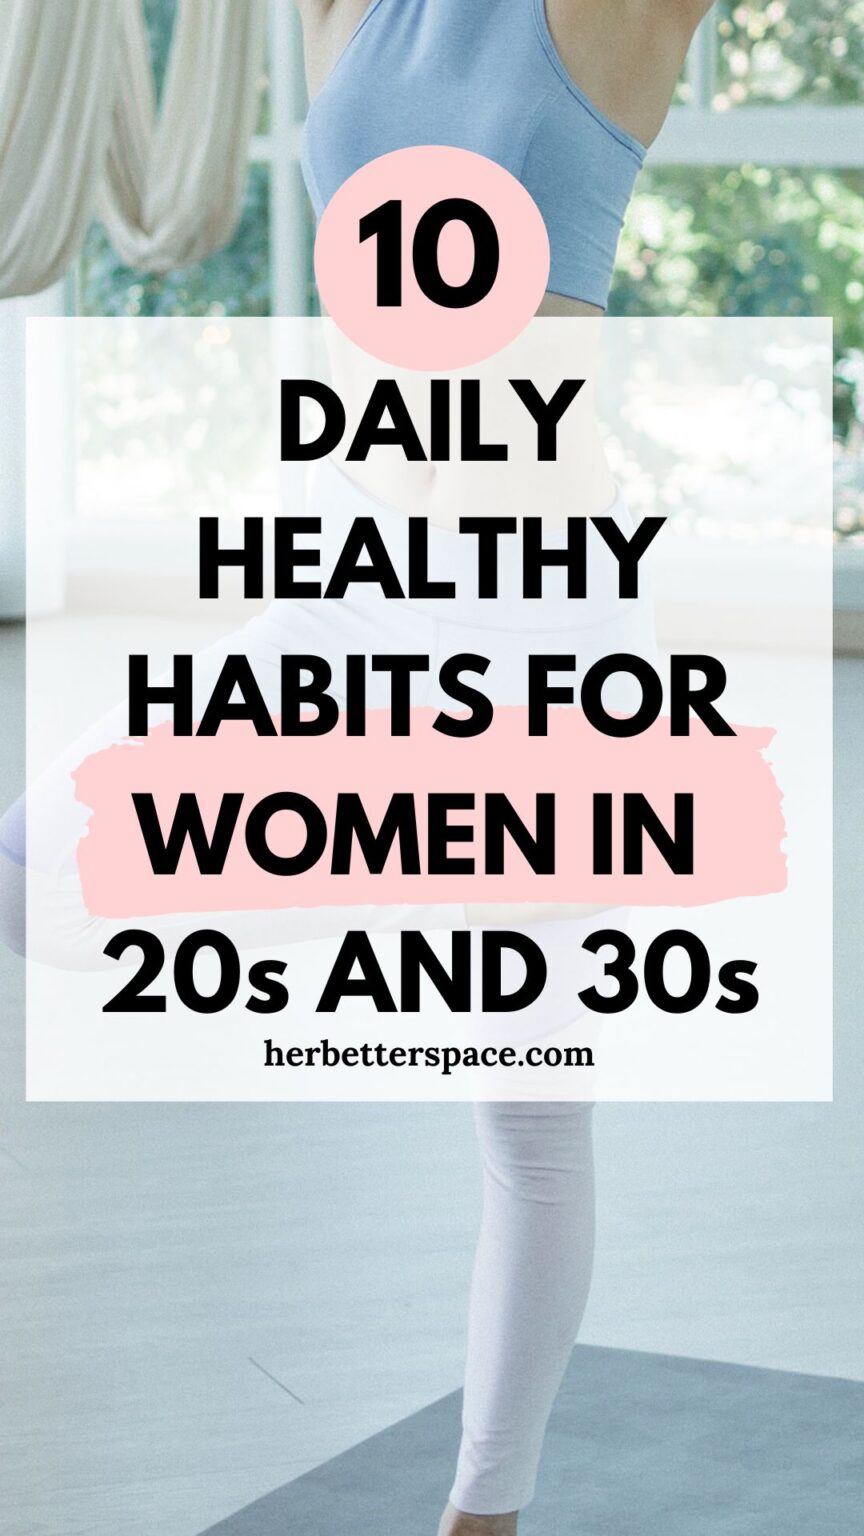 Healthy Habits For Women In Their 20s and 30s